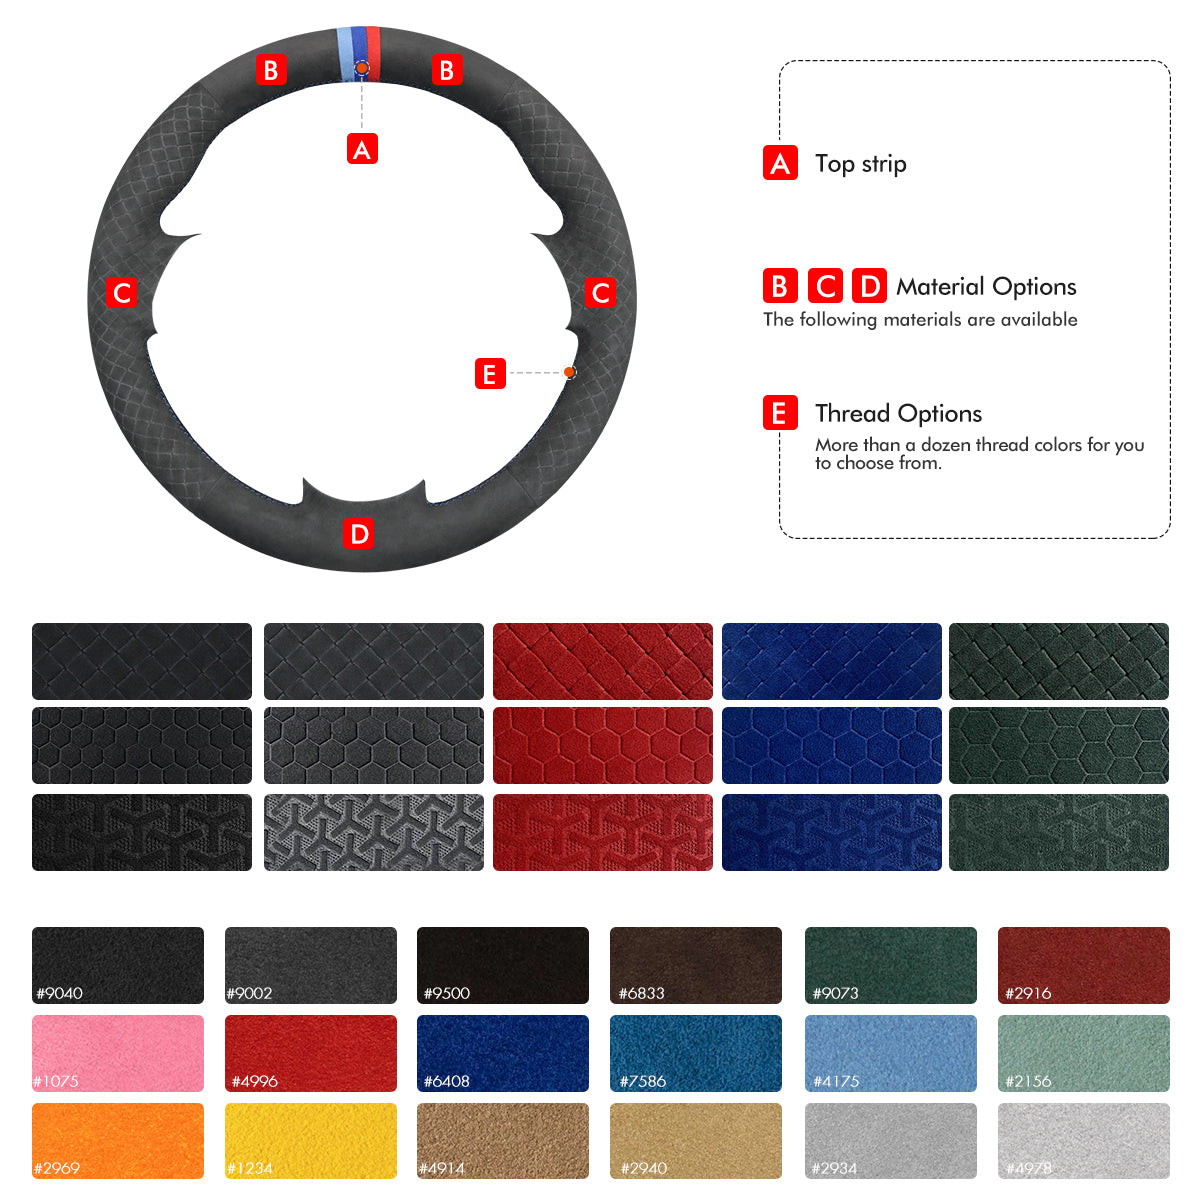 MEWANT Hand Stitching Black Leather Suede Car Steering Wheel Cover for BMW 7 Series E65 E66 E67 E68 2002-2008